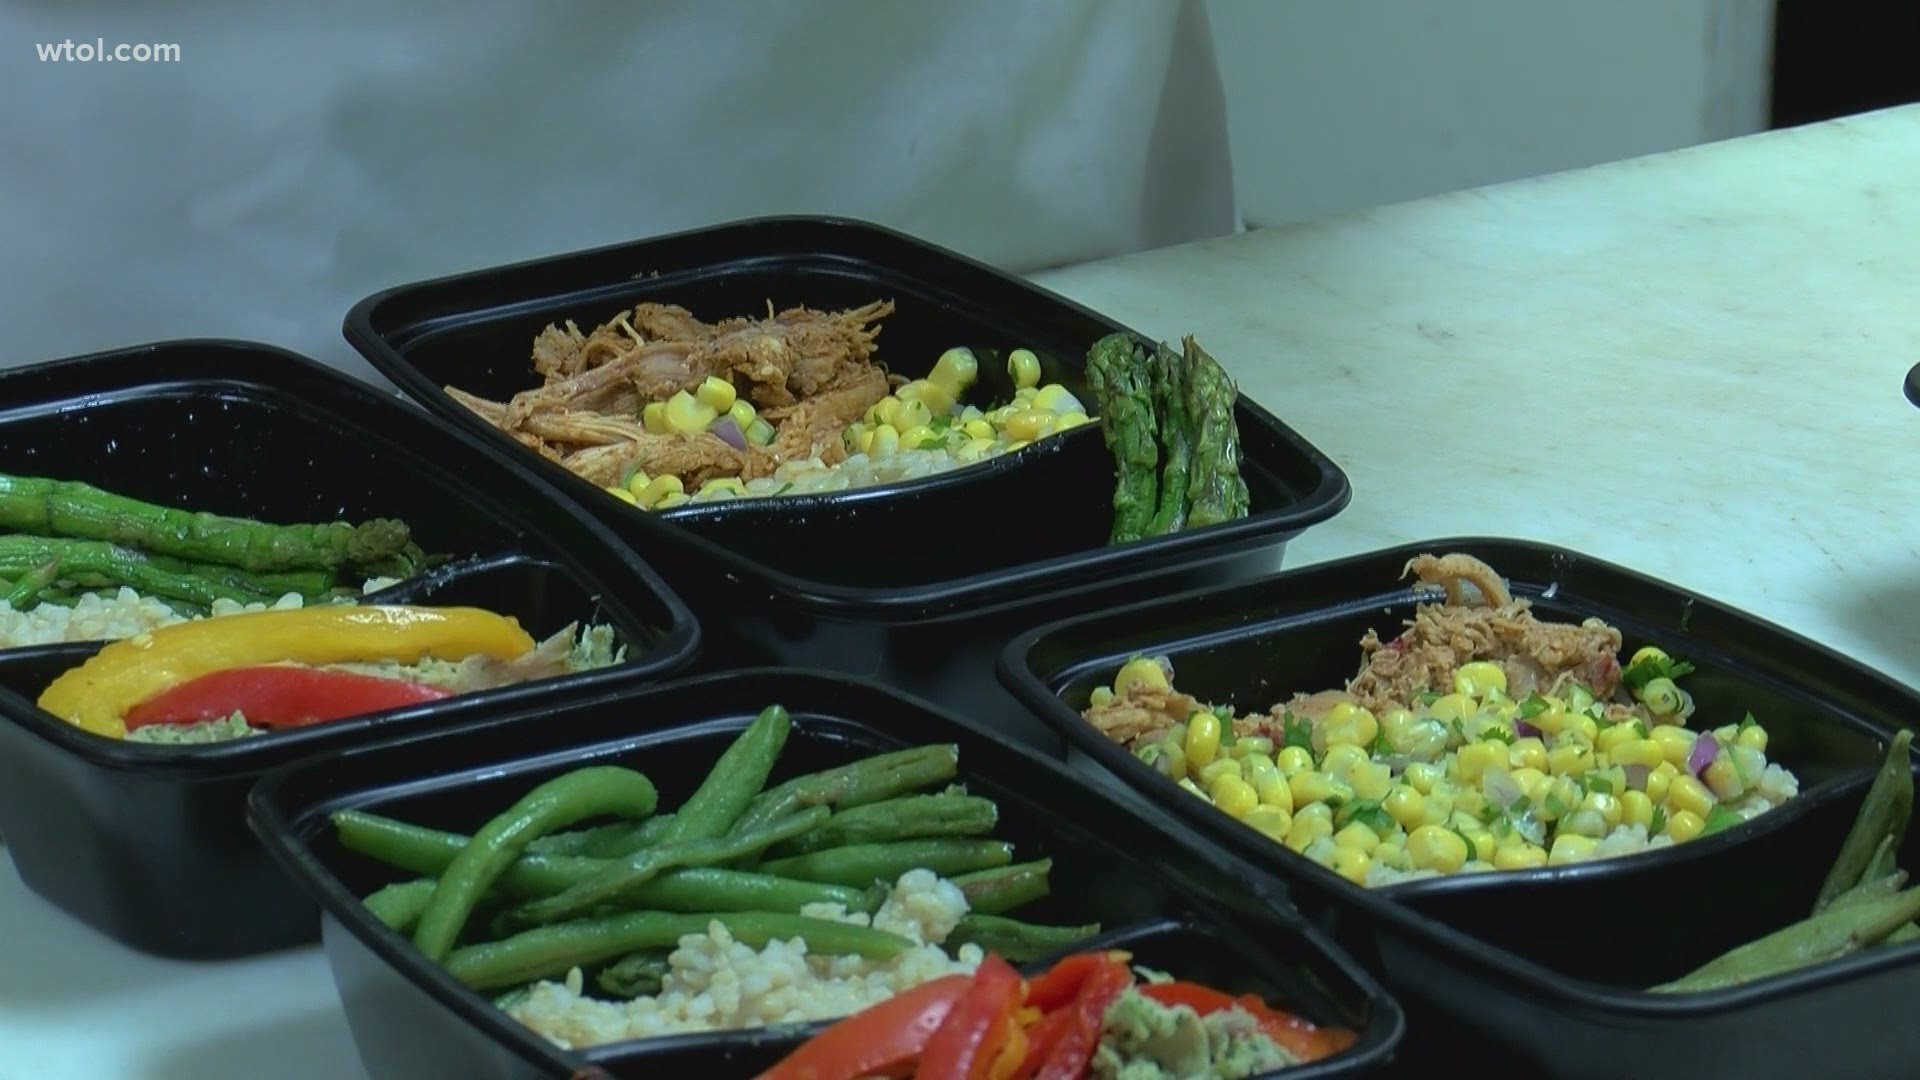 Planning and preparing meals can be difficult for some - Meal Prep 4 Me makes it easy for people in the community who is trying to eat healthy and fresh